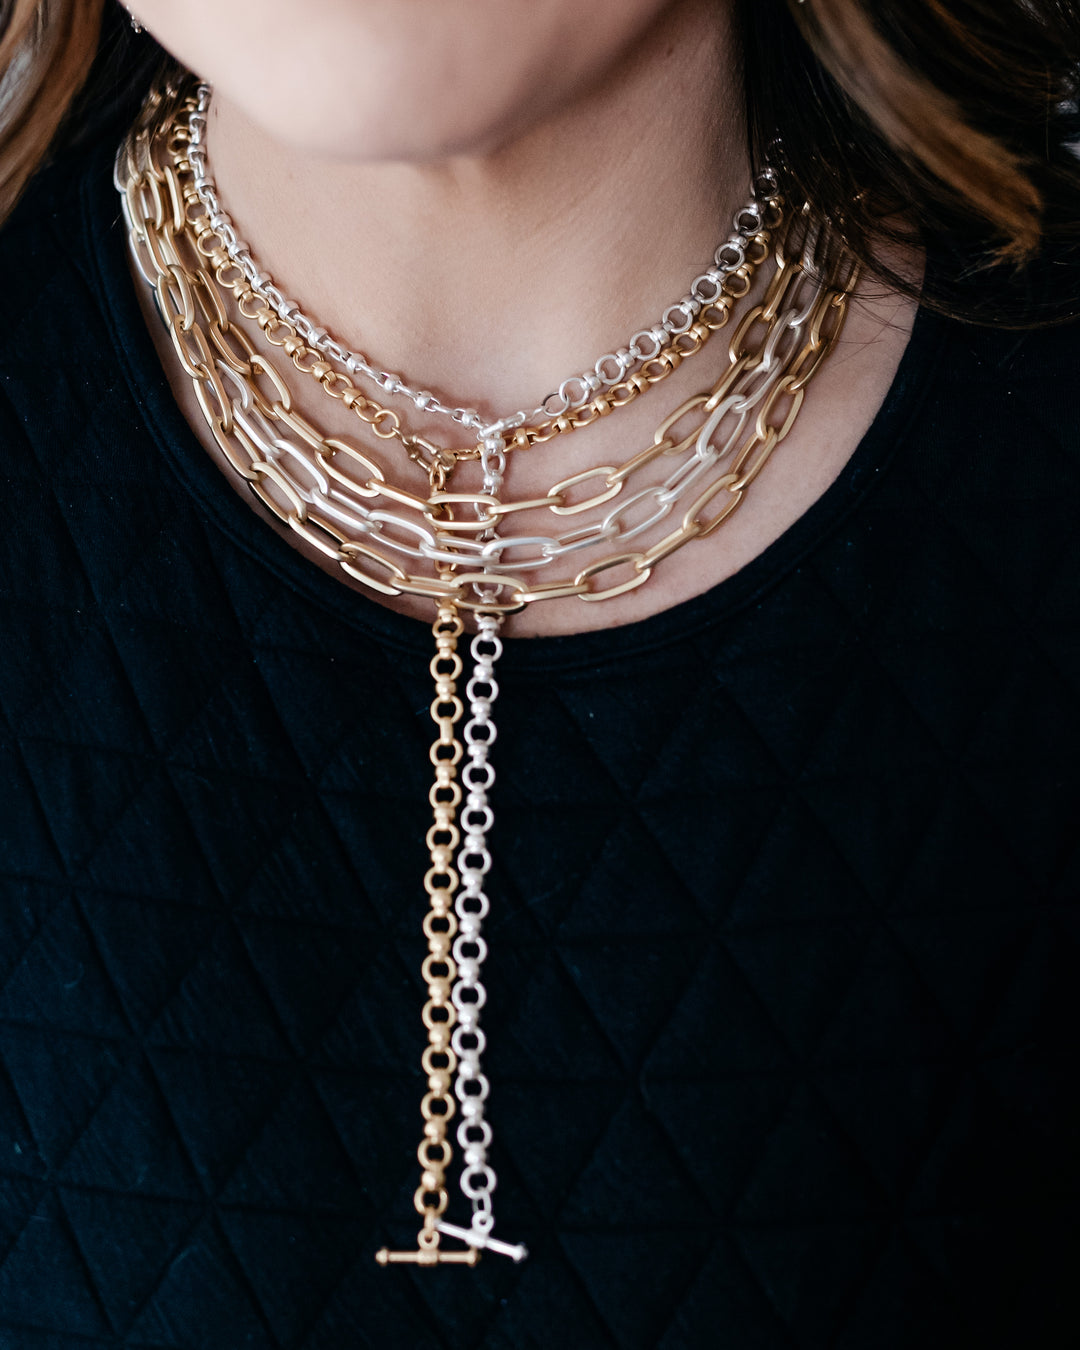 A woman modeling chainlink necklaces.